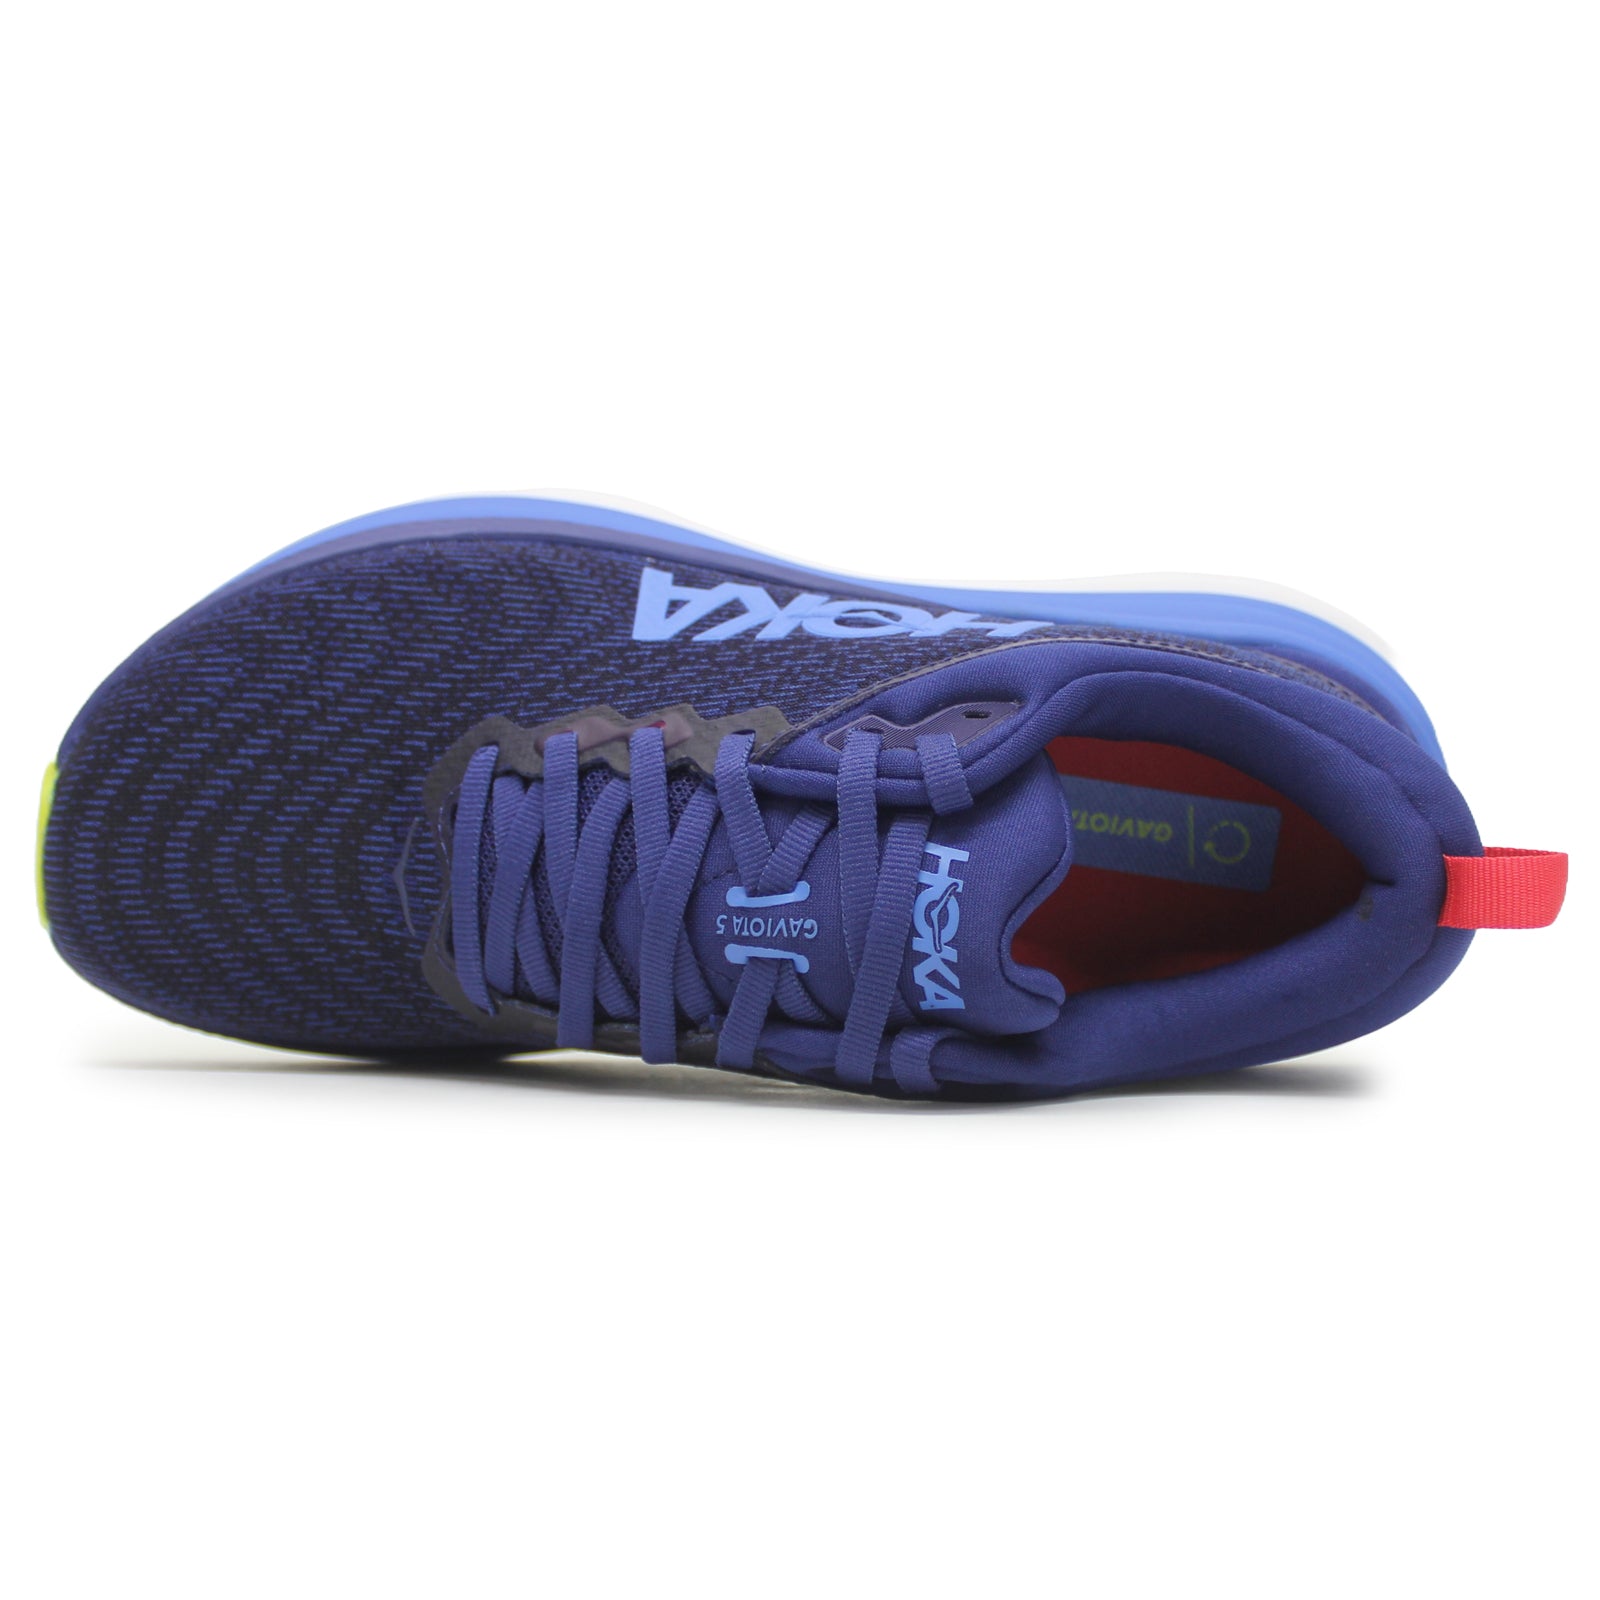 Hoka One One Gaviota 5 Textile Synthetic Mens Sneakers#color_Bellwether Blue Evening Sky